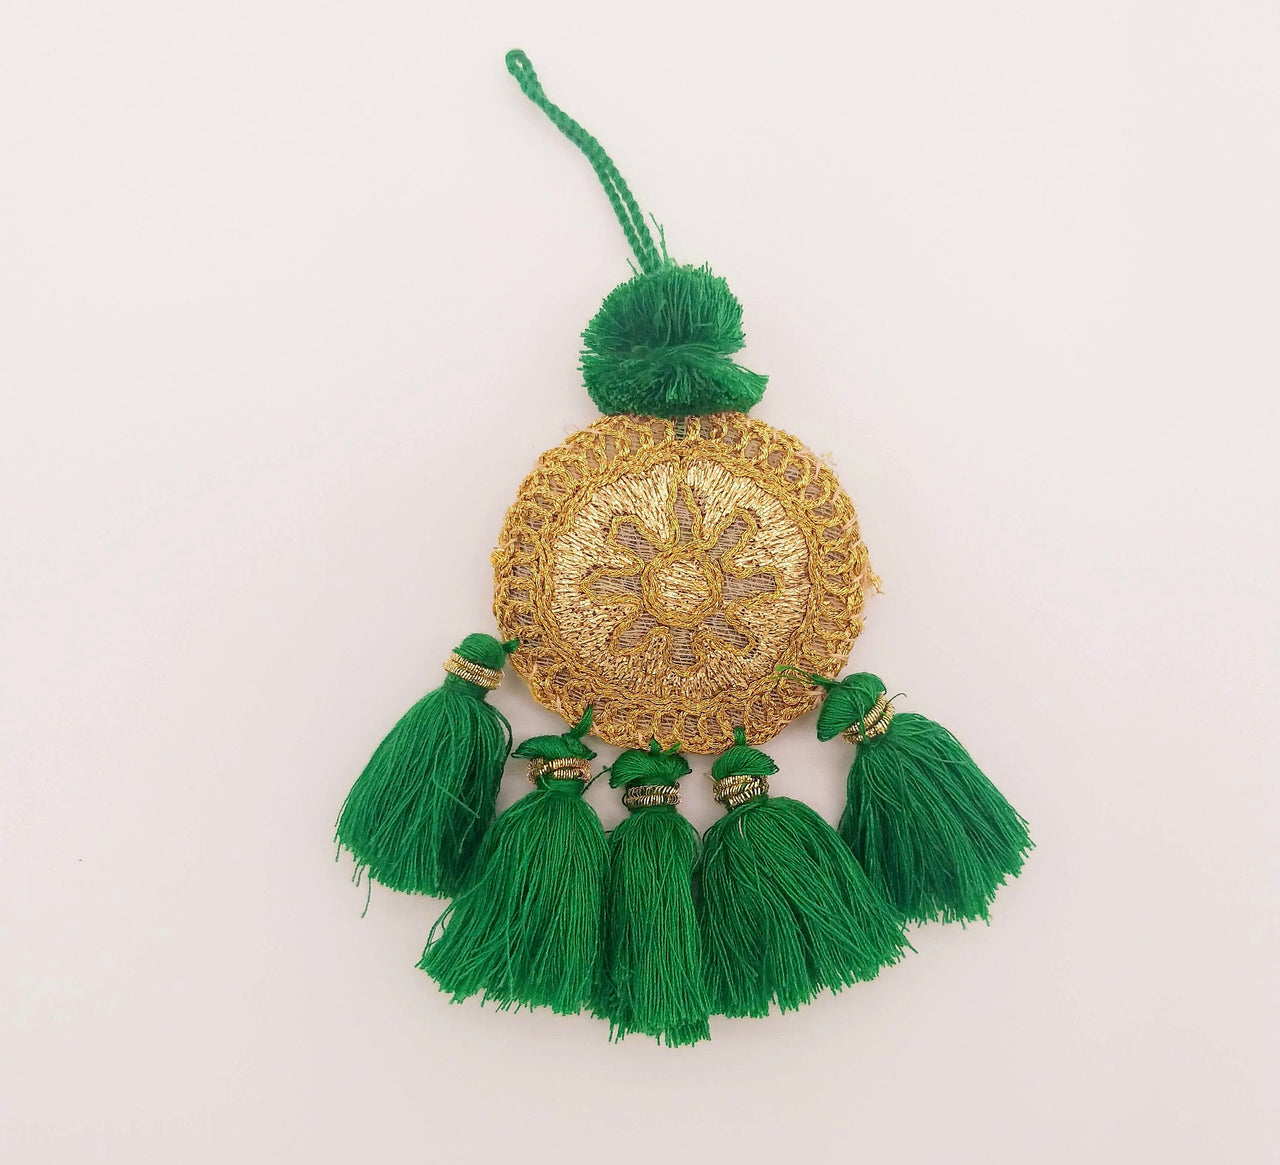 Set of 2 Embroidered Tassels, Green and Gold Tassels, Indian Tassels